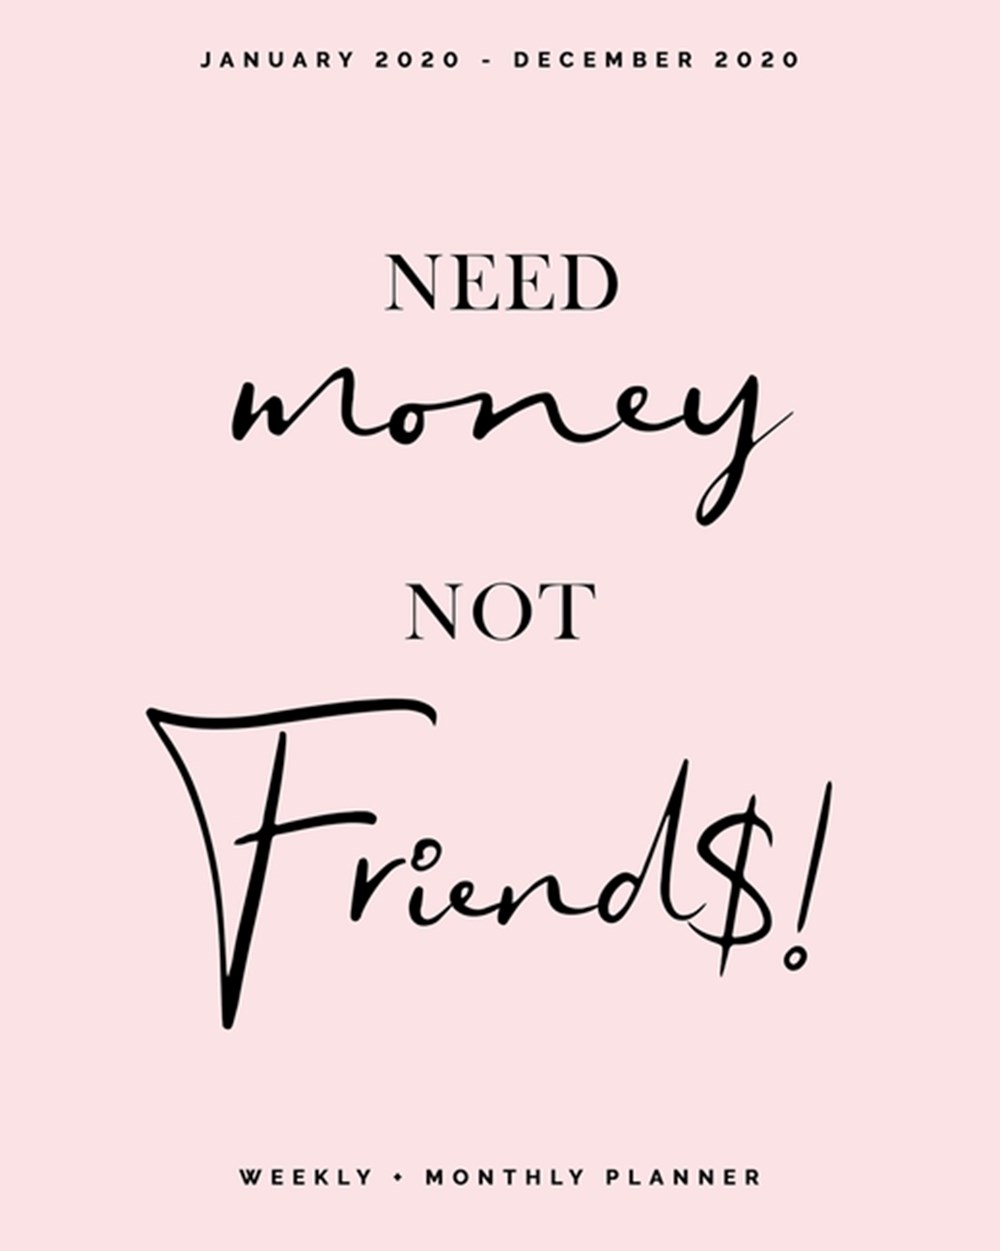 Need Money, Not Friends - January 2020 - December 2020 - Weekly + Monthly Planner Blush Pink Calenda